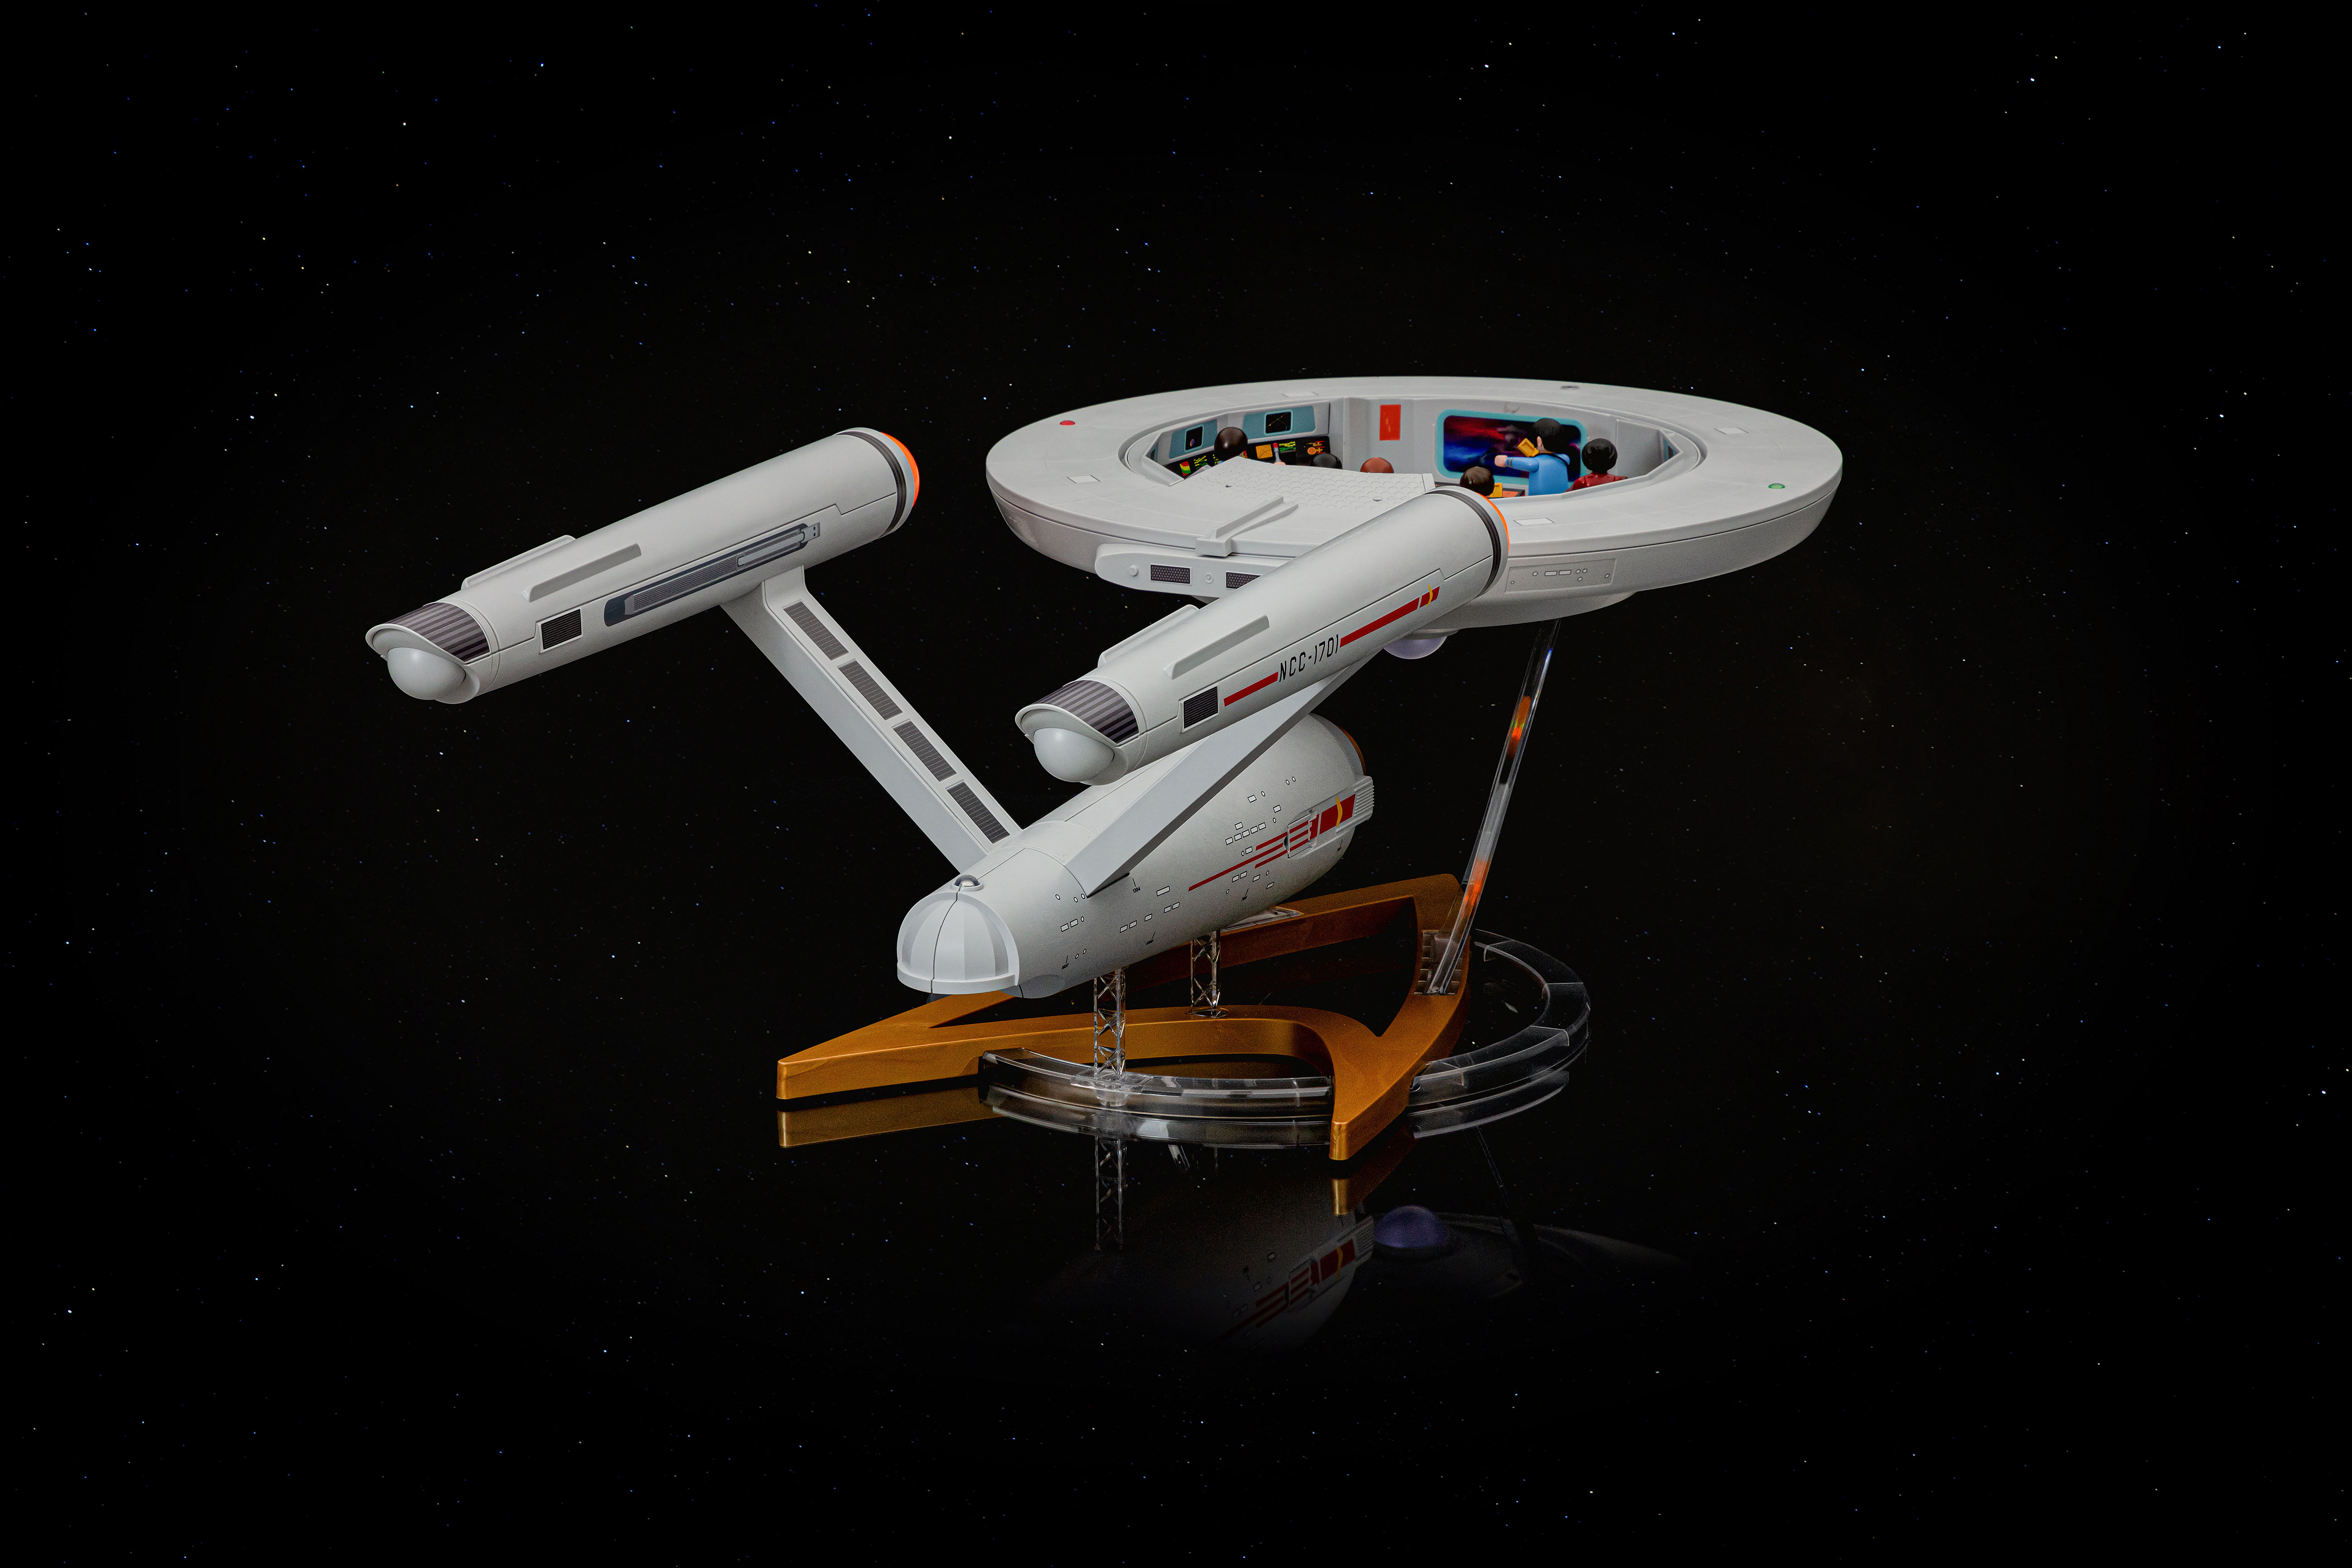 Star Trek and Playmobil Are Bringing the U.S.S. Enterprise to Your